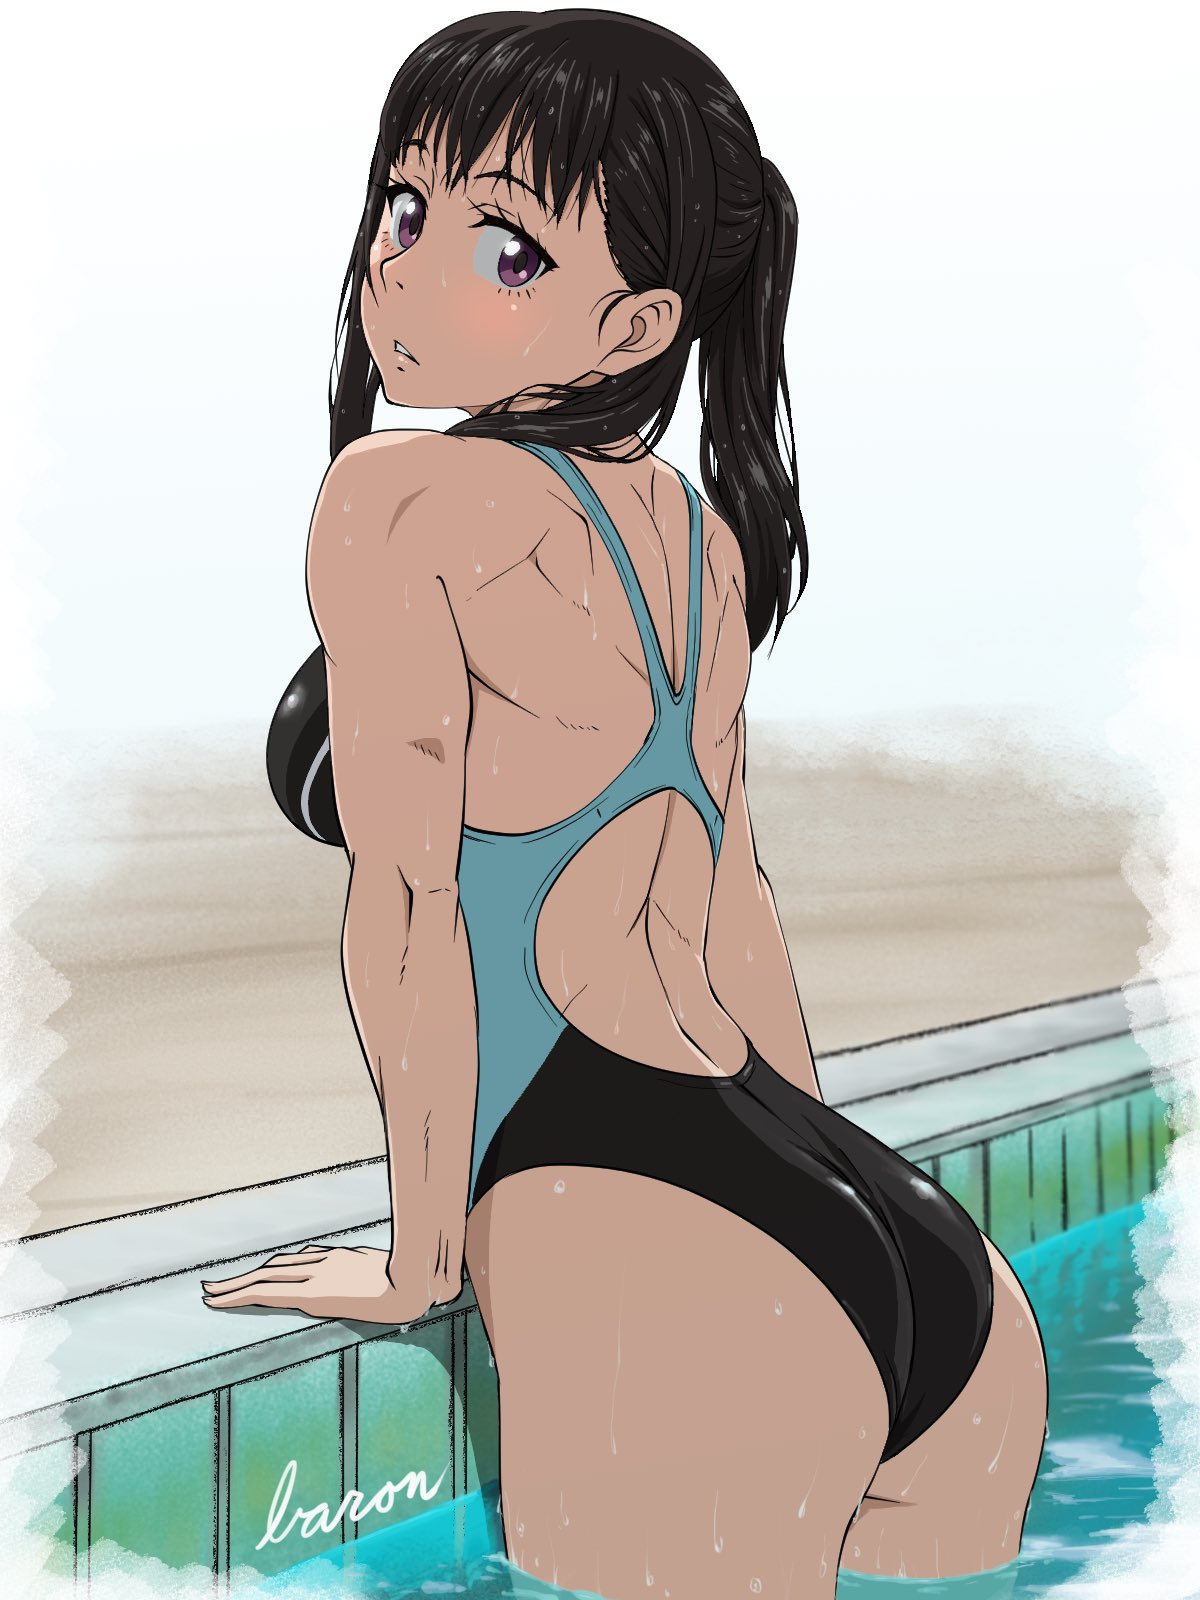 Anime 1200x1600 Enen no Shouboutai muscles biceps black swimsuit competition swimsuit muscular one-piece swimsuit ponytail long hair looking back black hair thighs swimming pool summer 2D Maki Oze wet body sideboob looking at viewer purple eyes portrait display fan art anime anime girls watermarked blushing embarrassed bare shoulders ecchi wet hair Baron (artist) ass signature